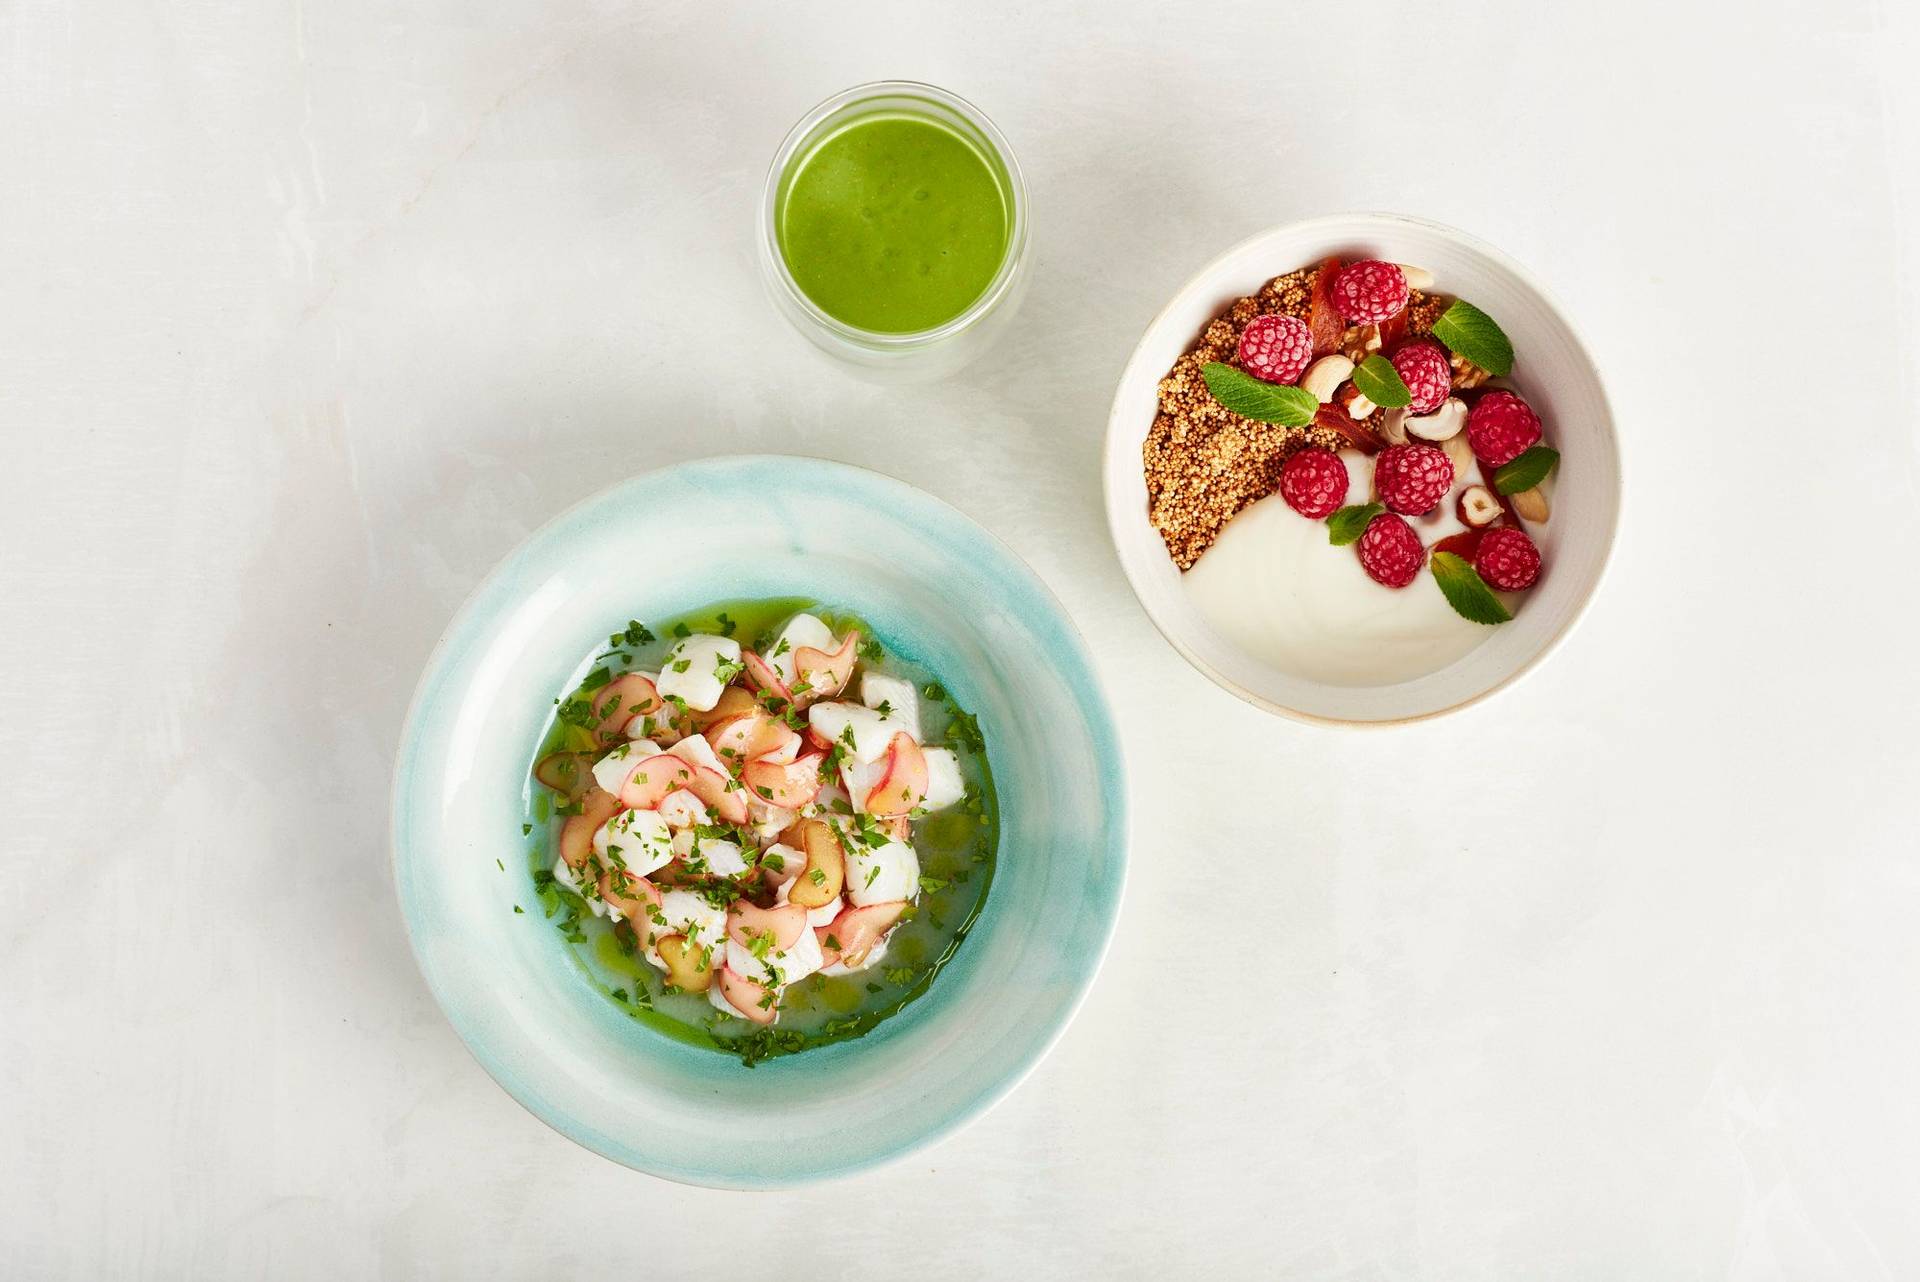 hangover breakfast with sorrel smoothie amaranth bowl and rhubarb ceviche on white background